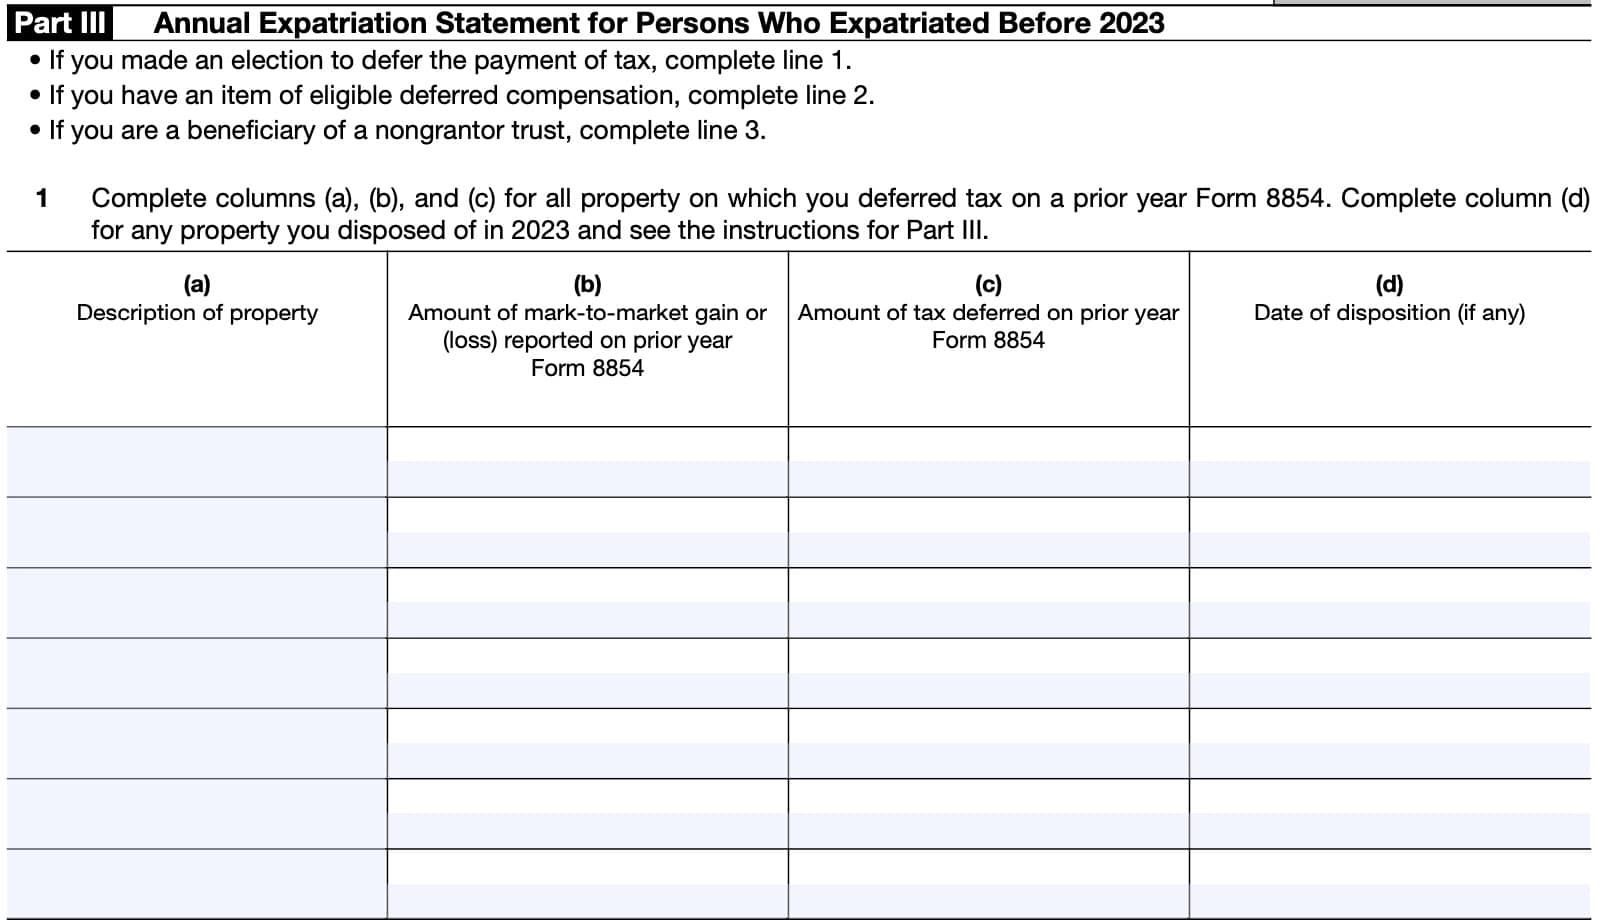 irs form 8854, part iii: annual expatriation statement for persons who expatriated before 2023